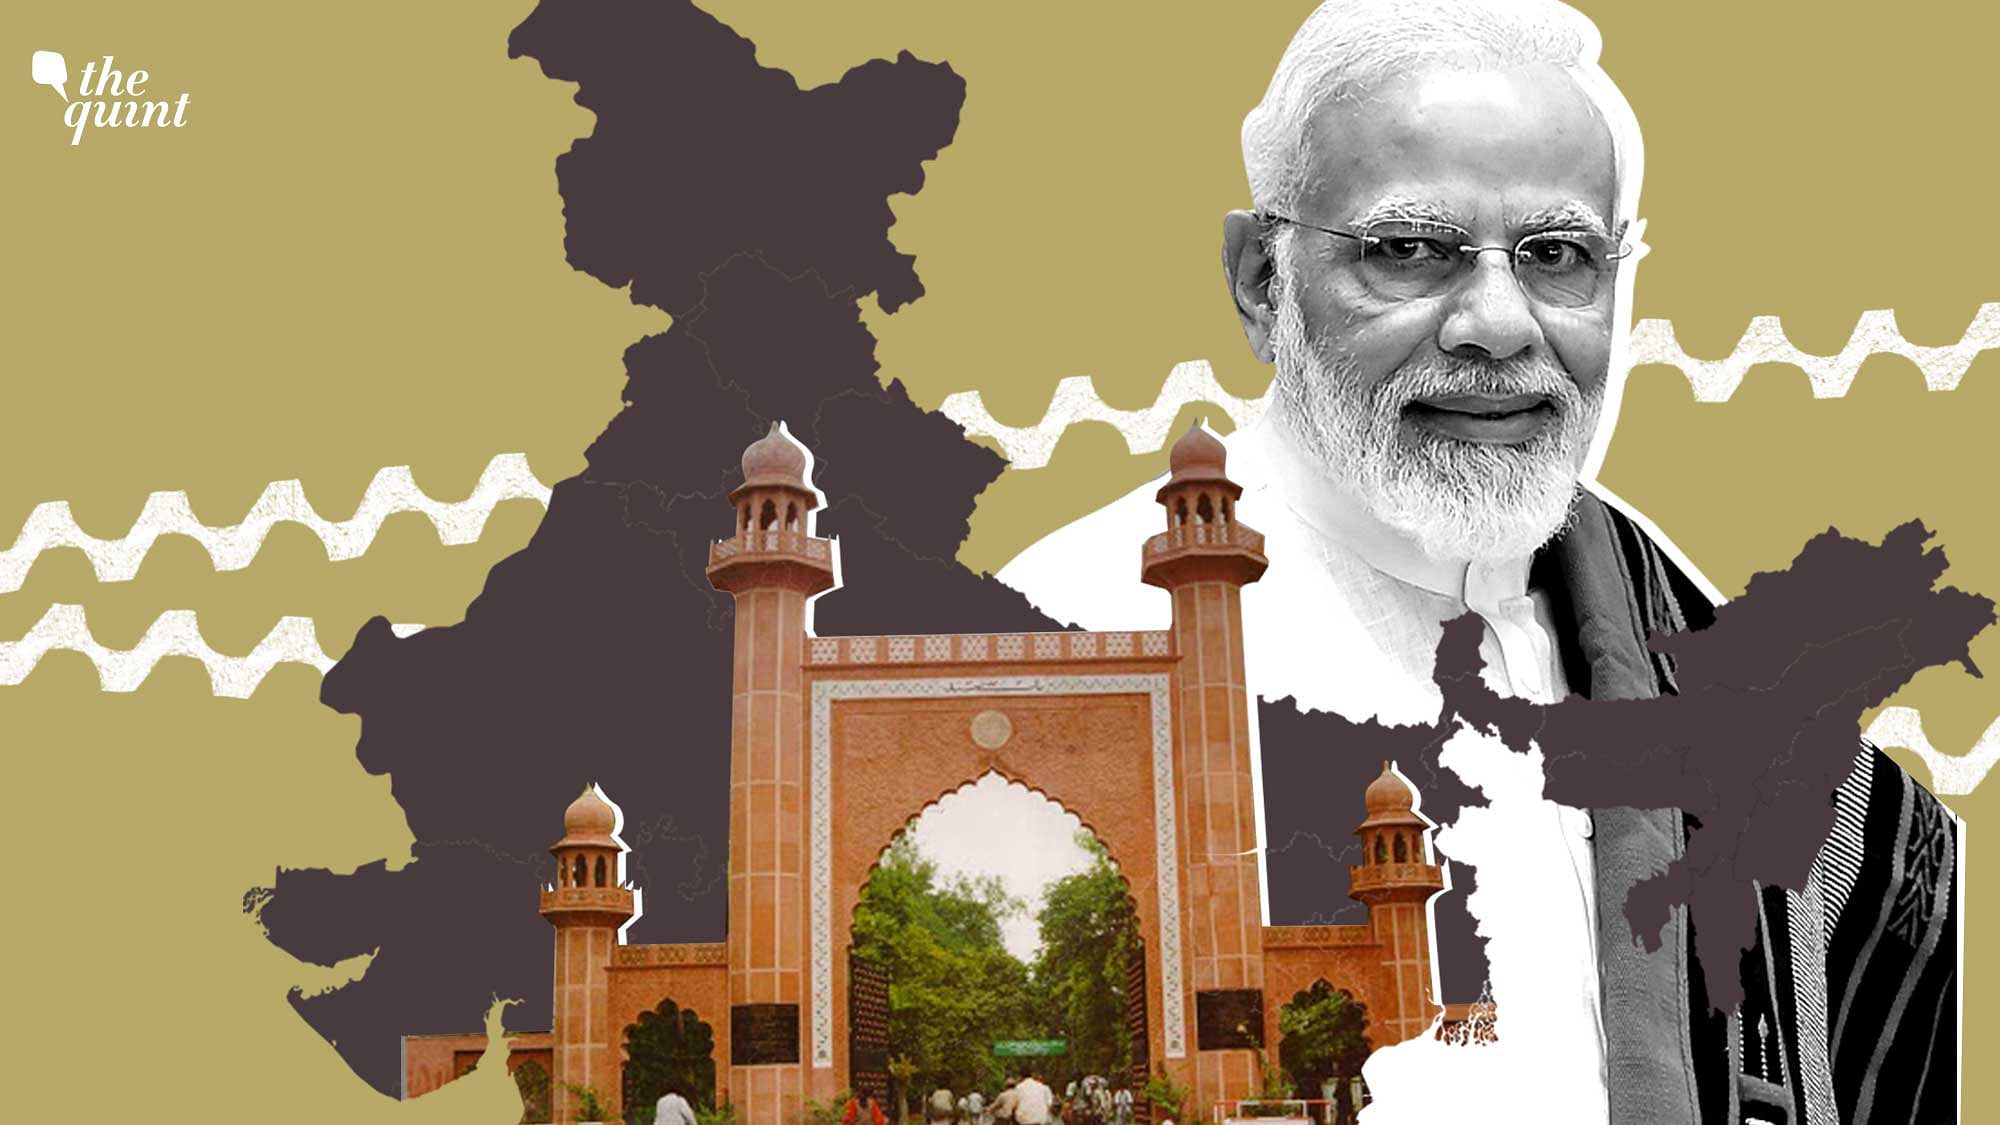 Image of PM Modi, map of India (in the background), and Aligarh Muslim University used for representational purposes.